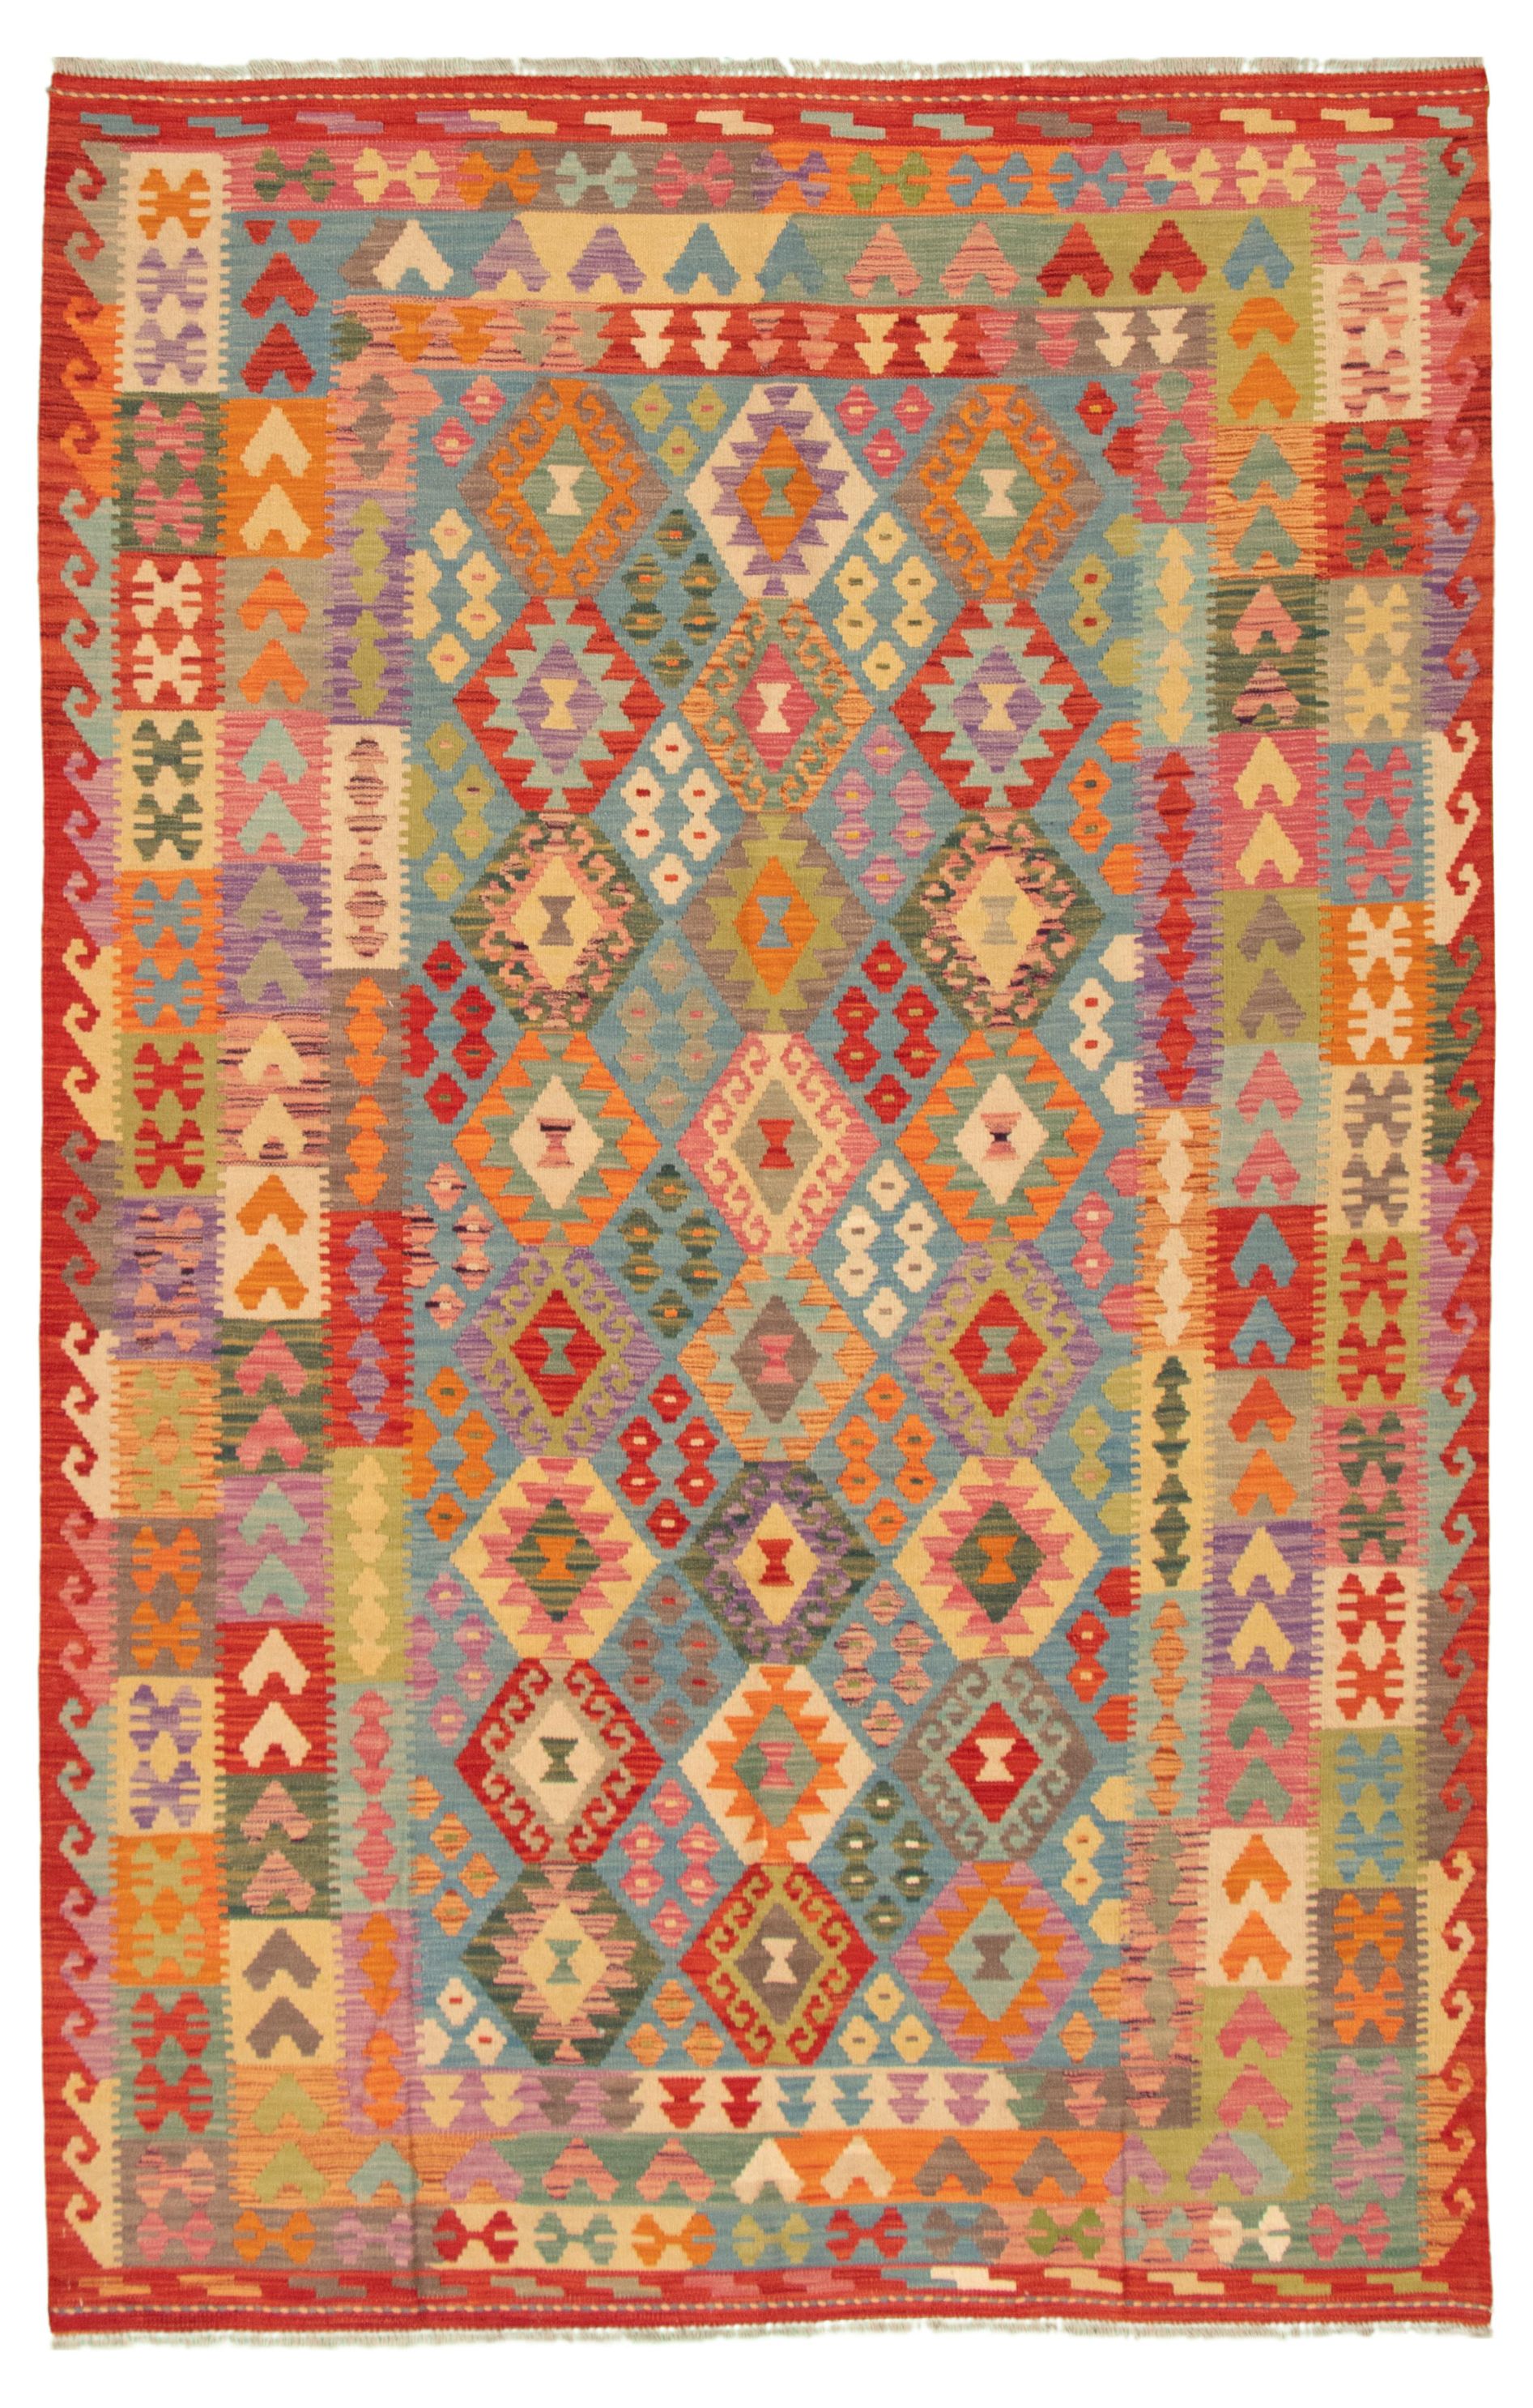 Hand woven Bold and Colorful  Red Wool Kilim 6'7" x 9'8" Size: 6'7" x 9'8"  